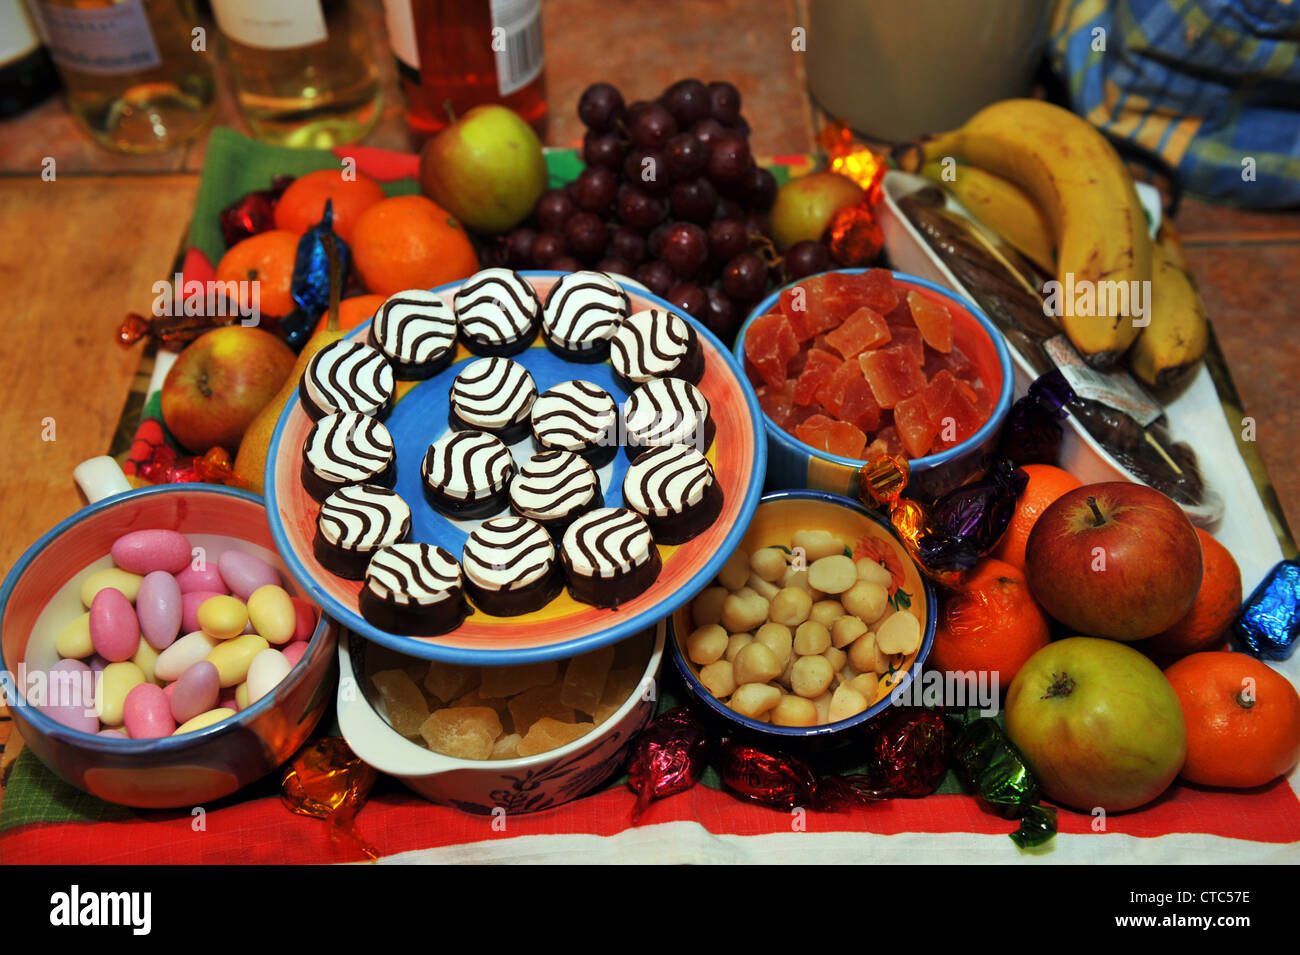 Christmas sweets and fruits to celebrate Christmas Eve. Stock Photo